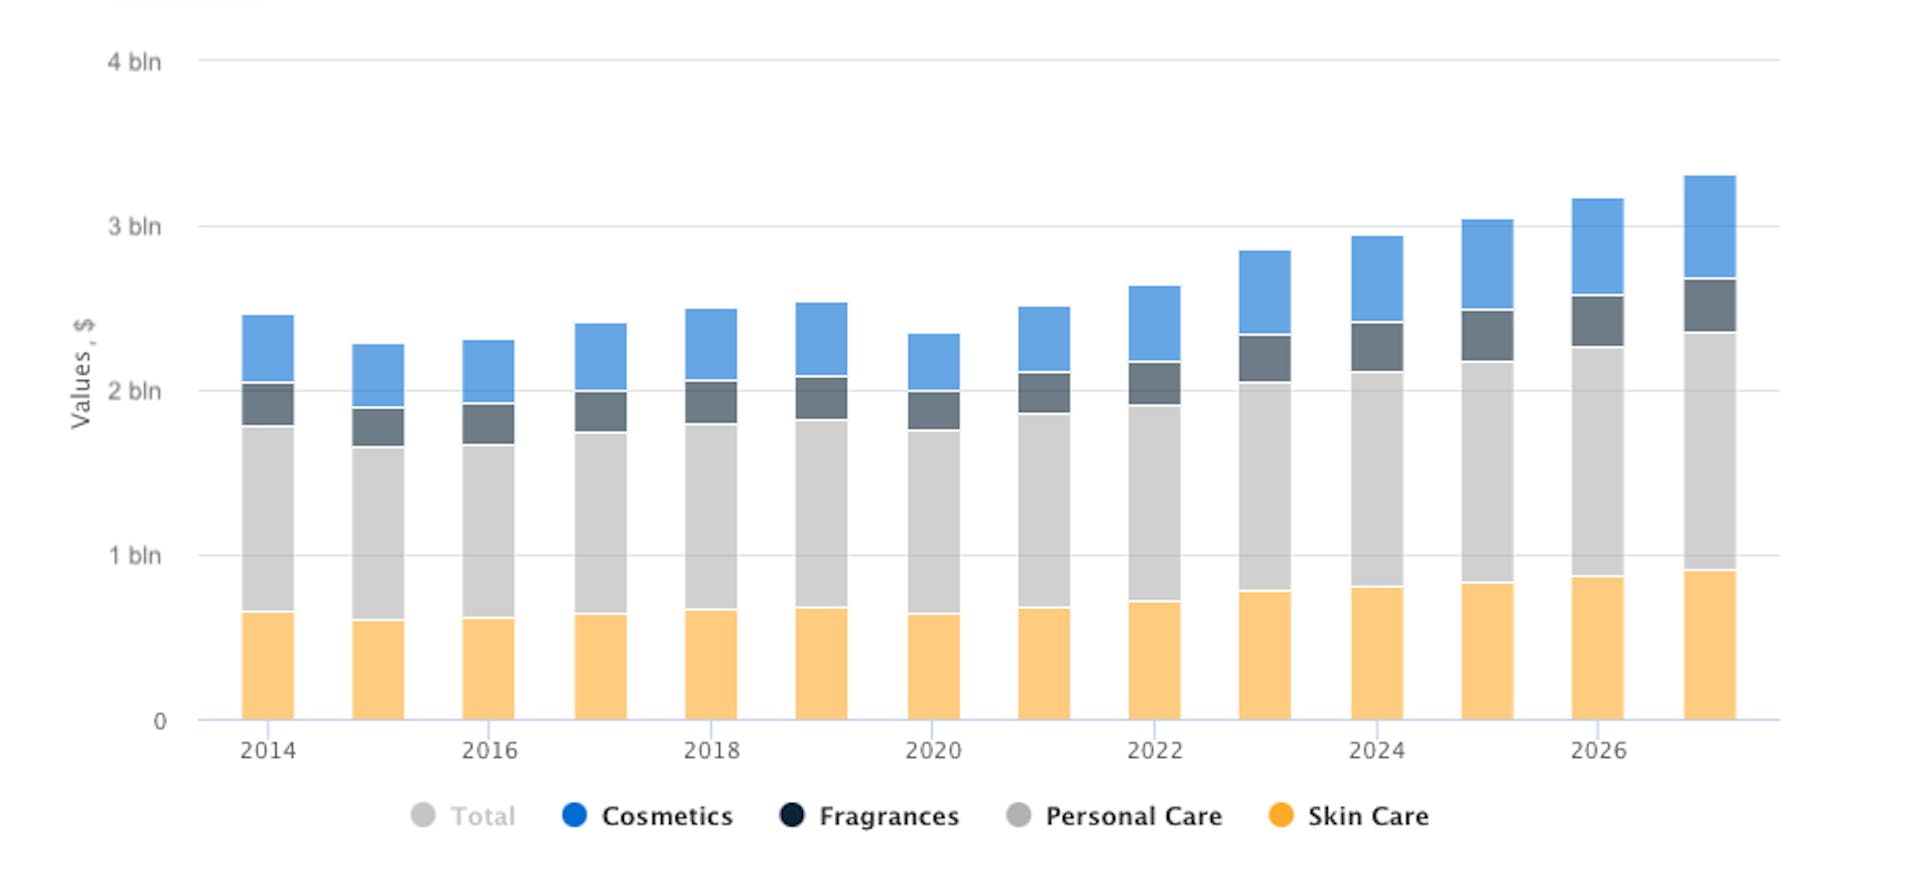 The chart of expected growth for the beauty market